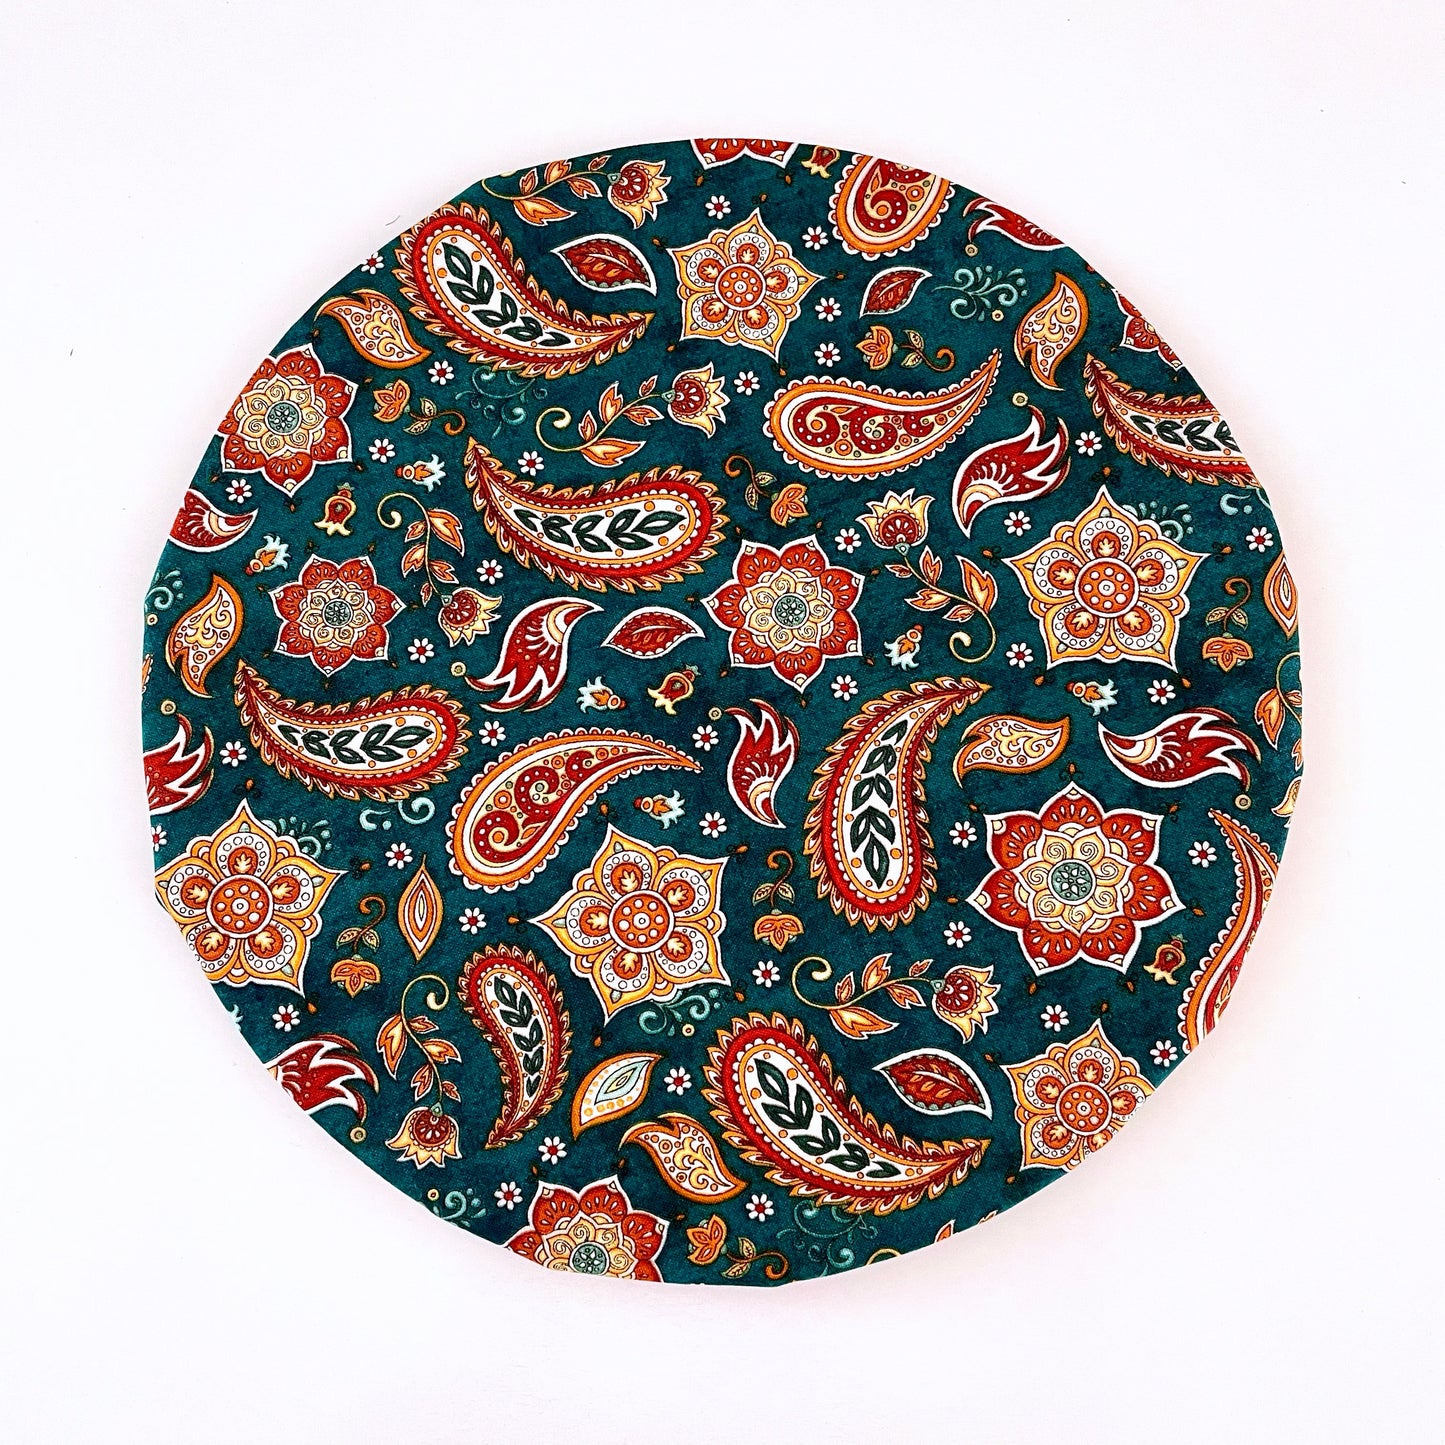 Stand Mixer Bowl Covers - Forest Green Paisley